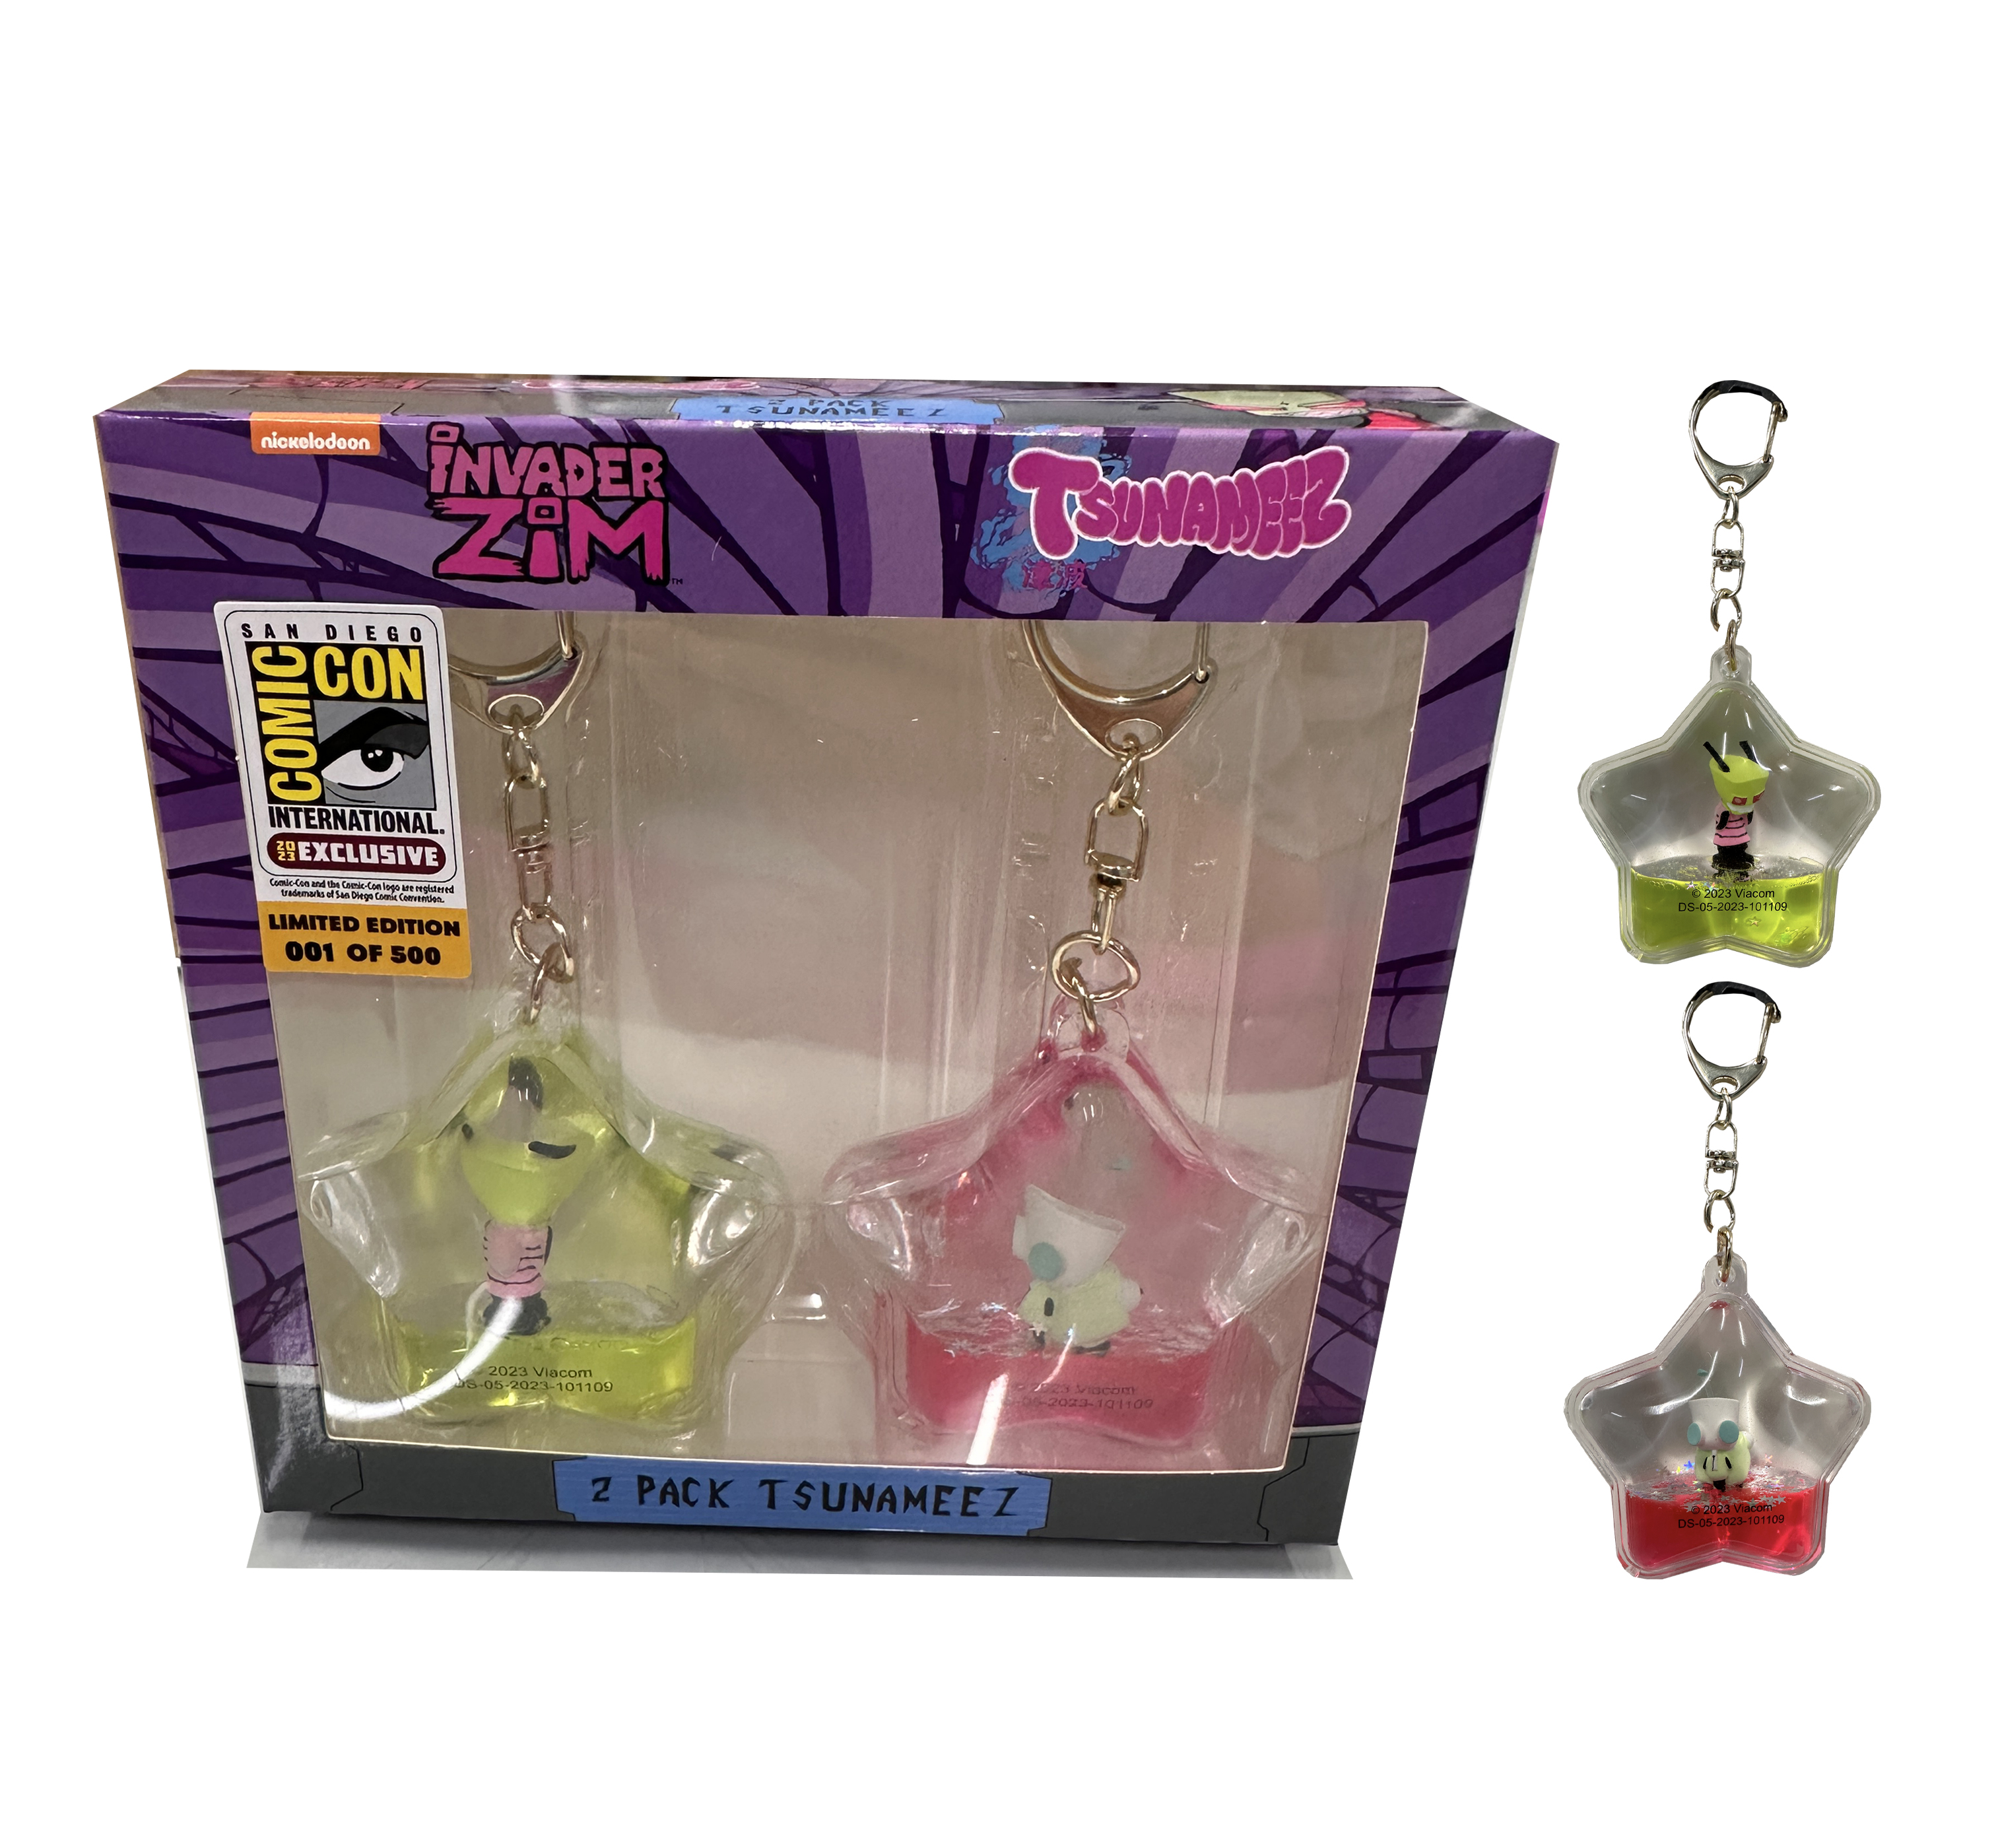 SDCC '22: Check out the Nickelodeon exclusives!